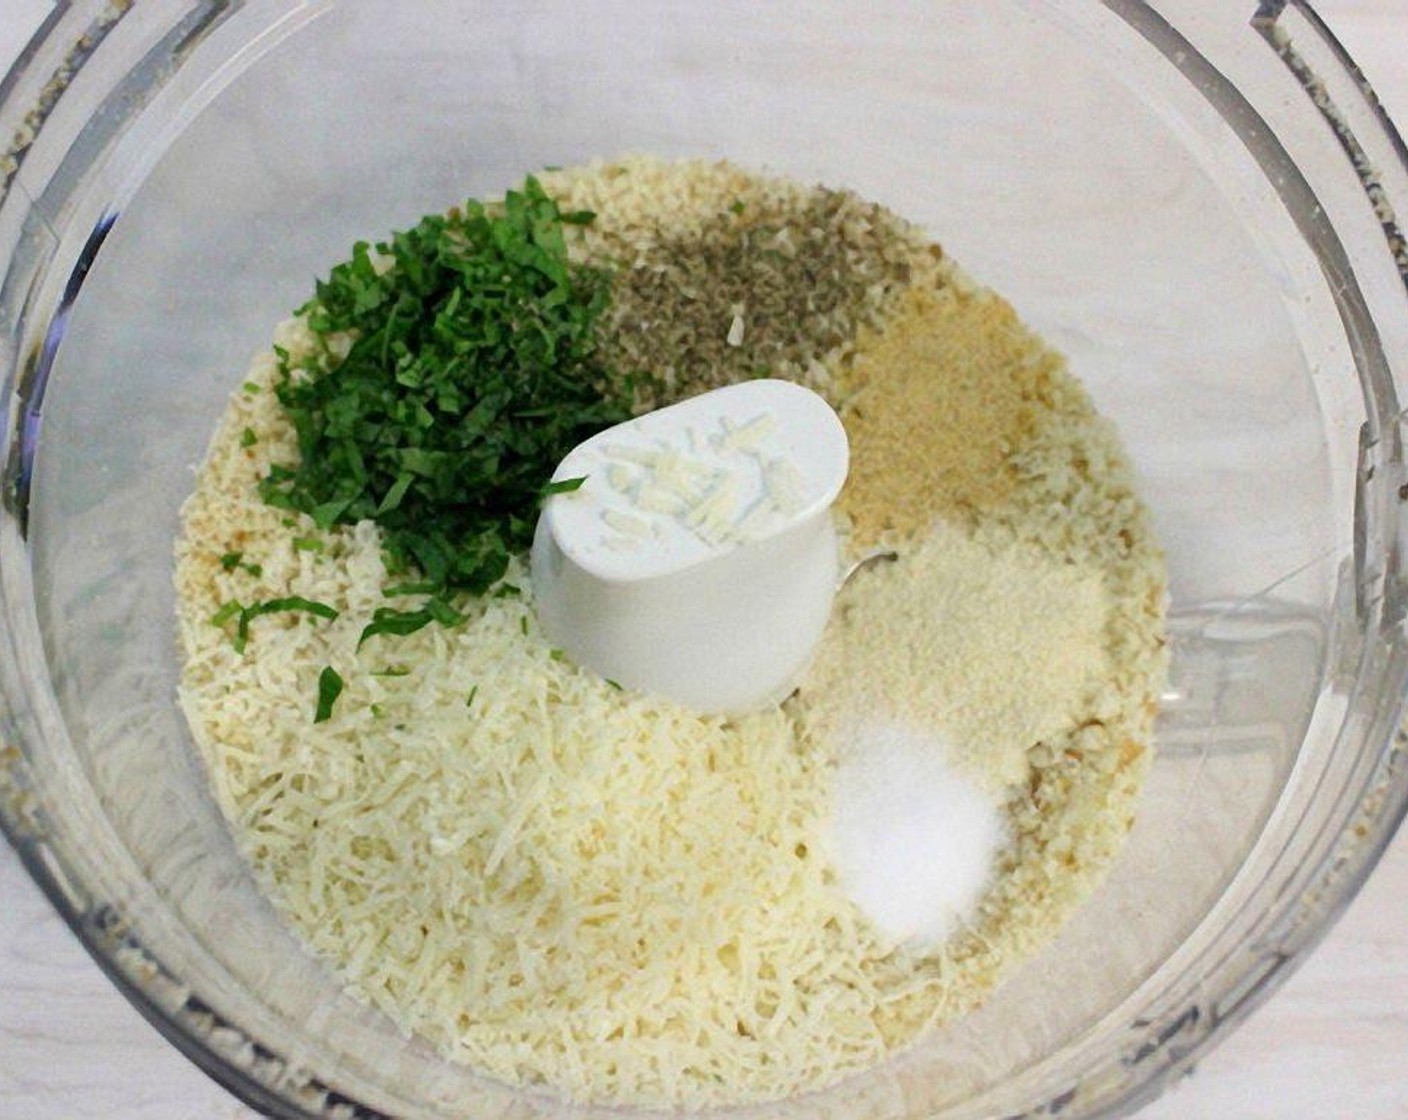 step 5 Add the rest of the breadcrumb ingredients – Onion Powder (1 tsp), Garlic Powder (1 tsp), Dried Mixed Herbs (1/2 tsp), Fresh Parsley (1 Tbsp), and Parmesan Cheese (1/3 cup). Mix until evenly combined.